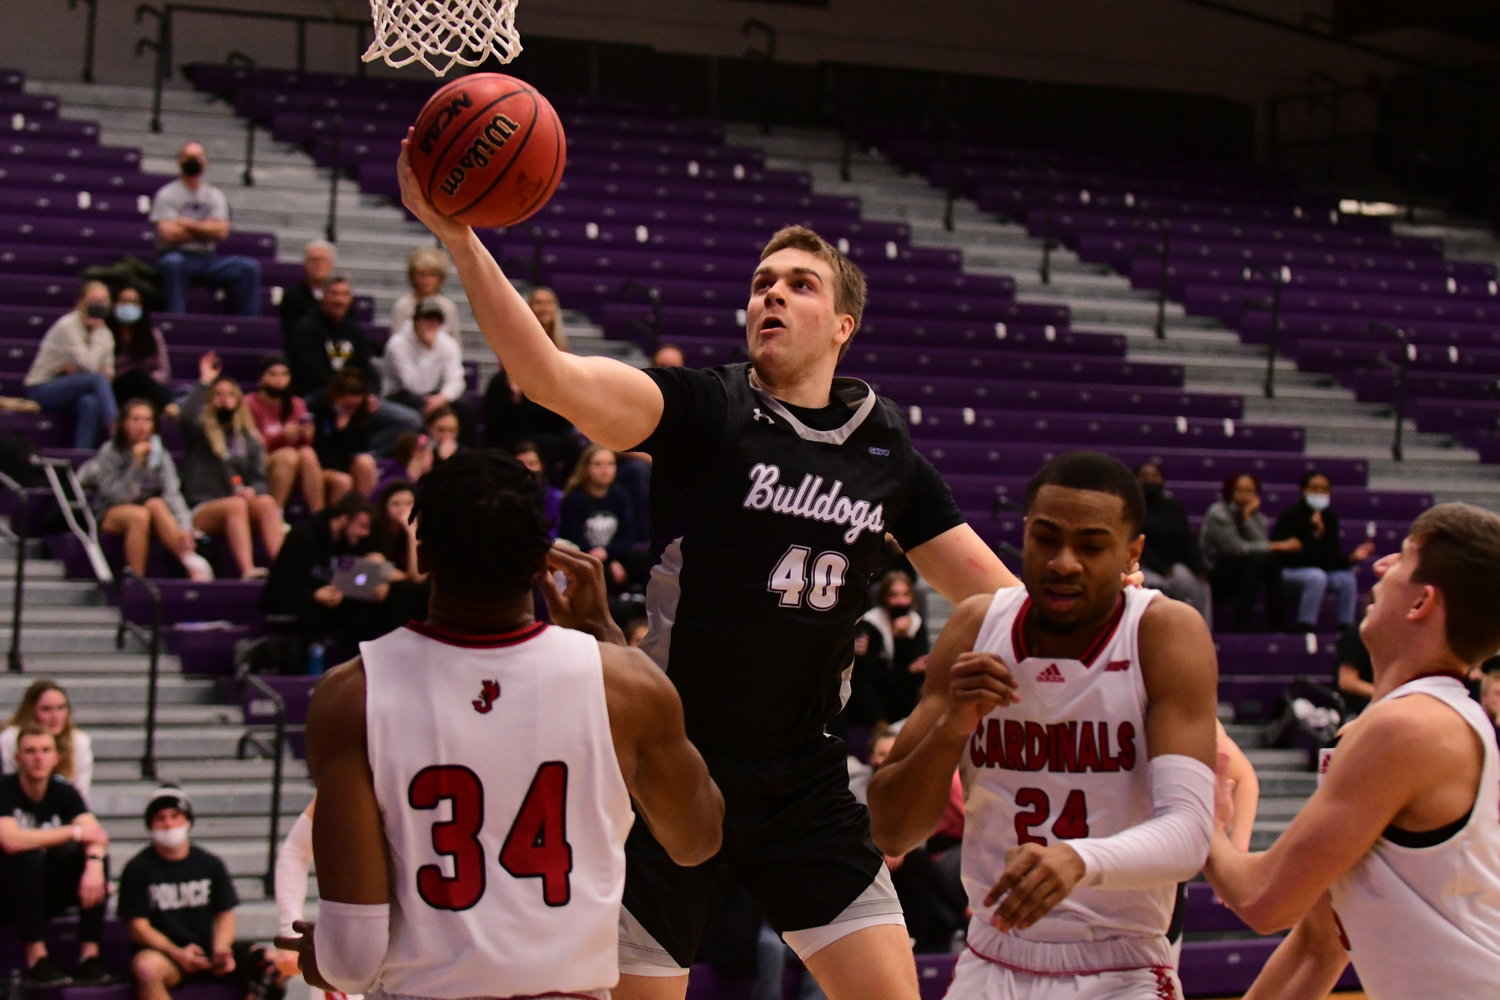 Truman's Cade McKnight goes up for a basket in a game against William Jewell.